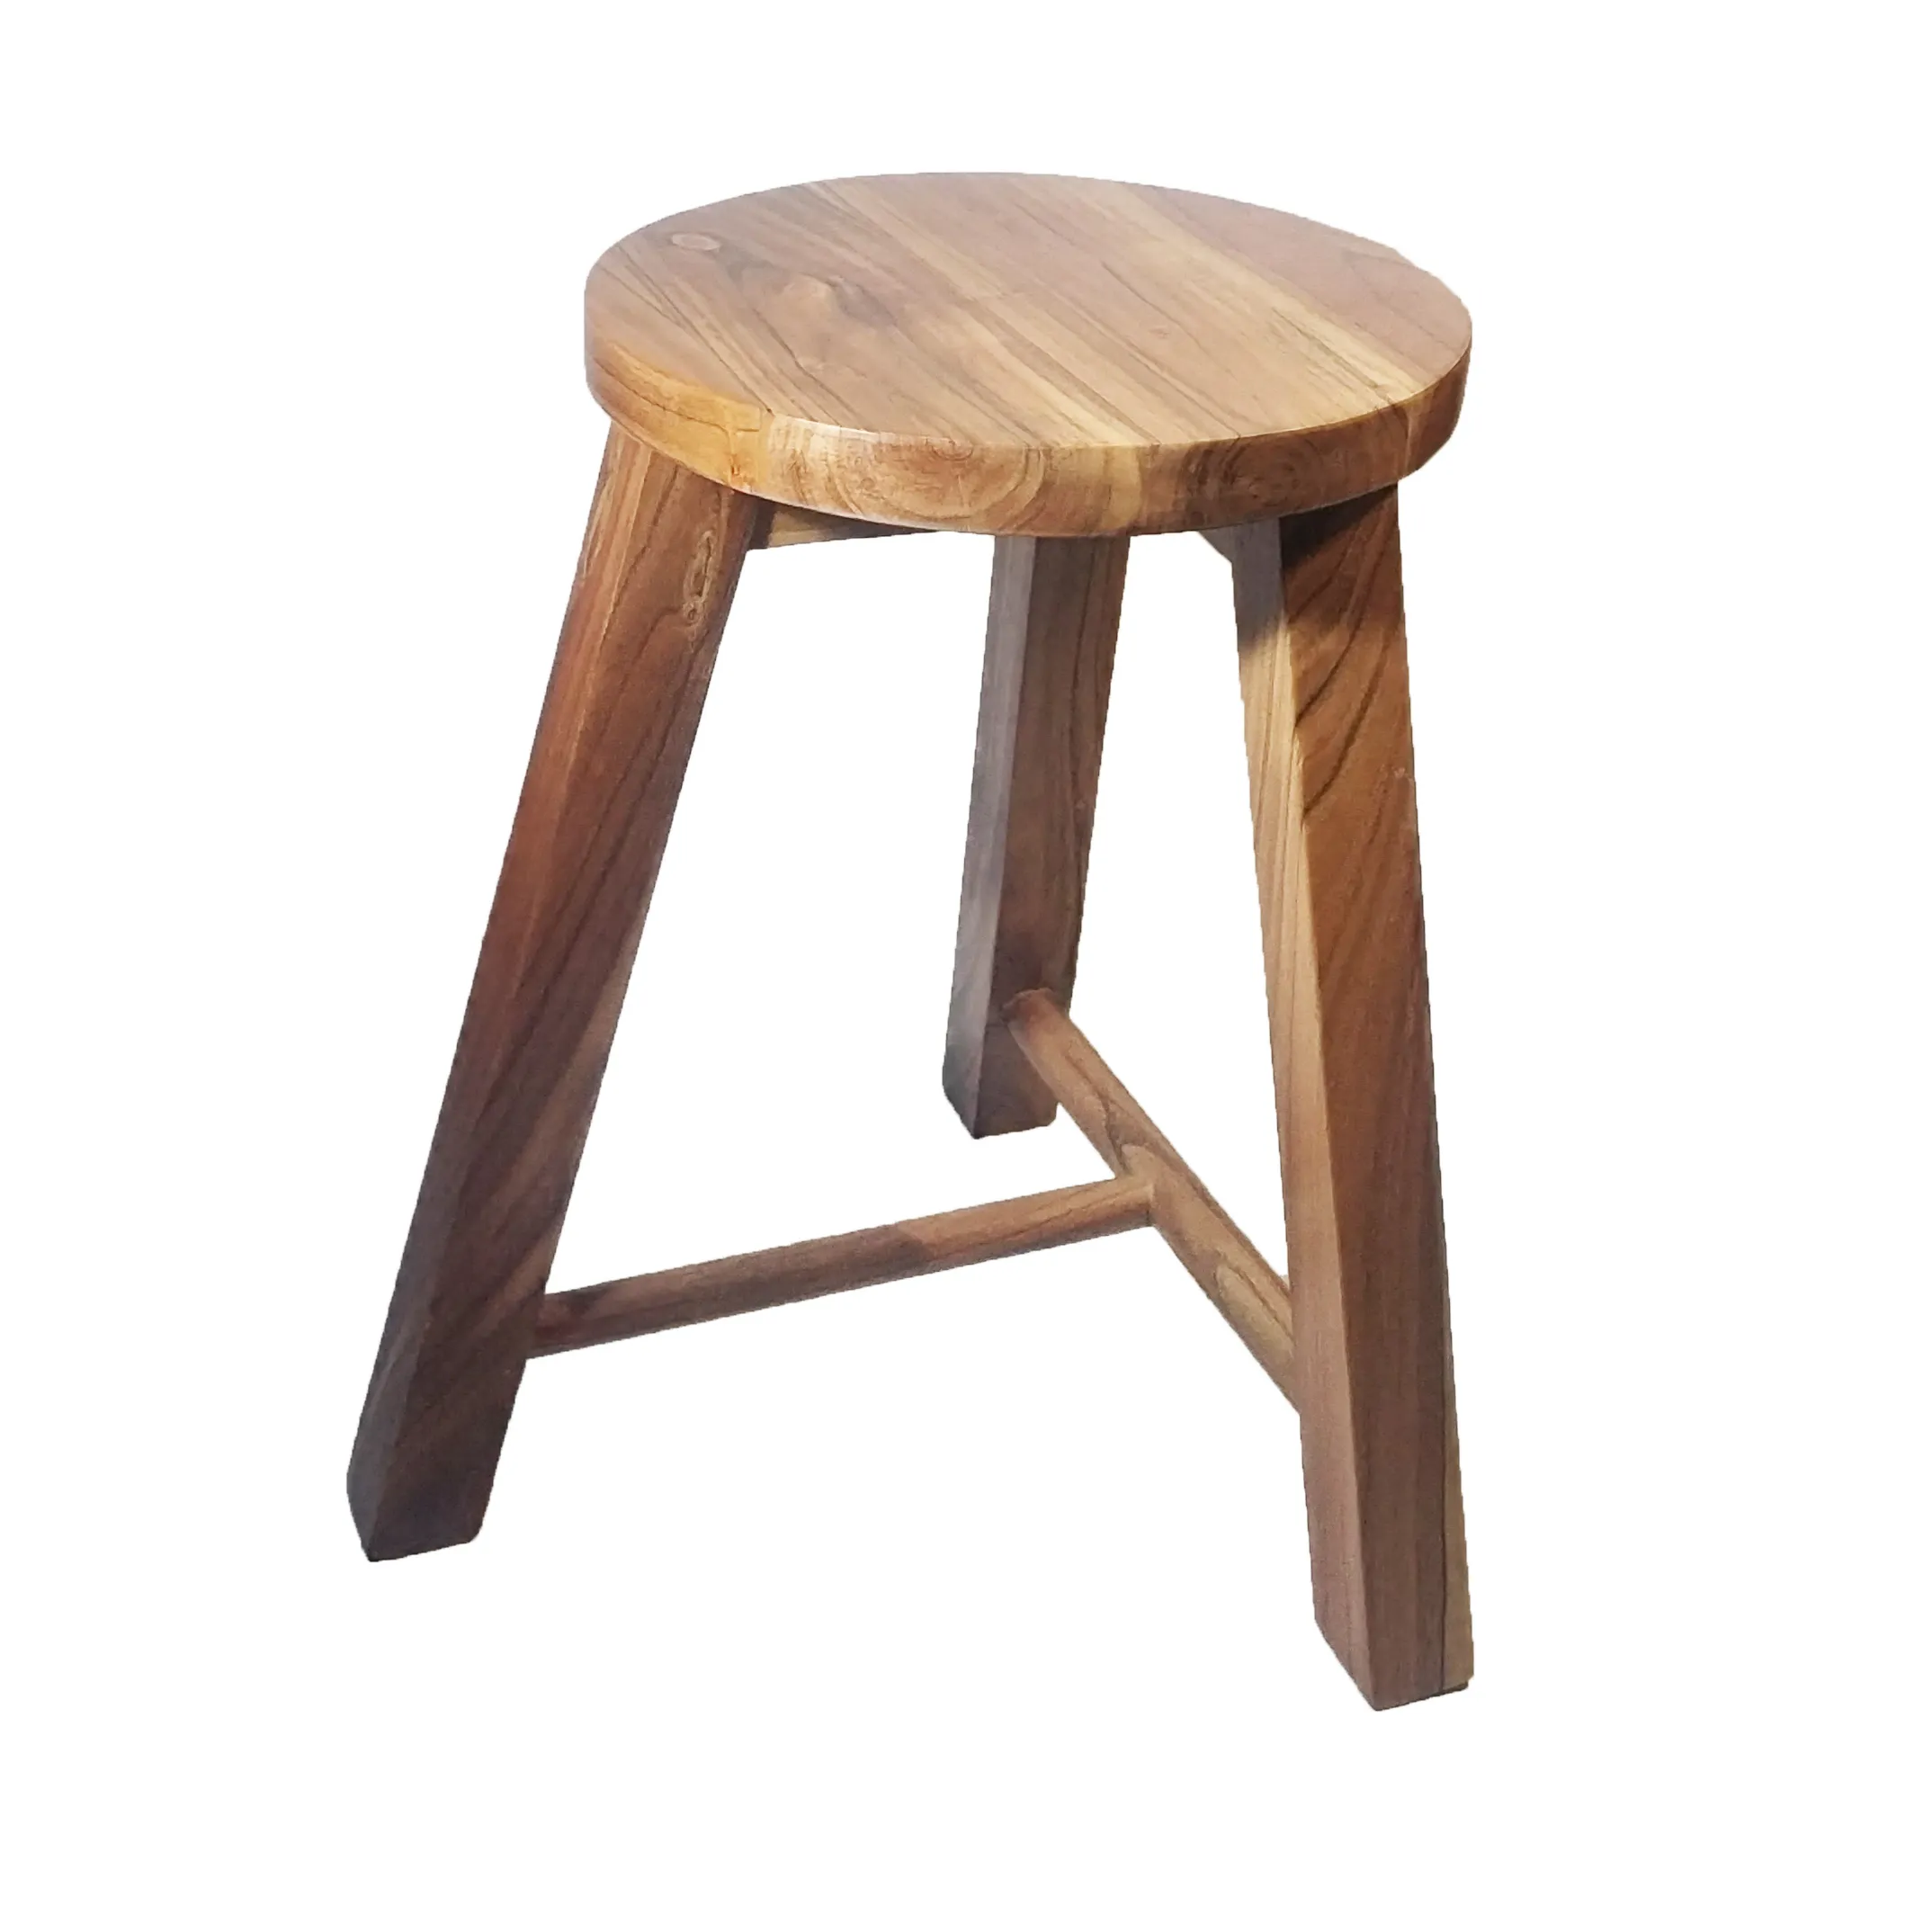 Home Bar Height Stools-Backless Barstools with Hairpin Legs Wood Seat-Kitchen or Dining Living- Modern Room Furniture